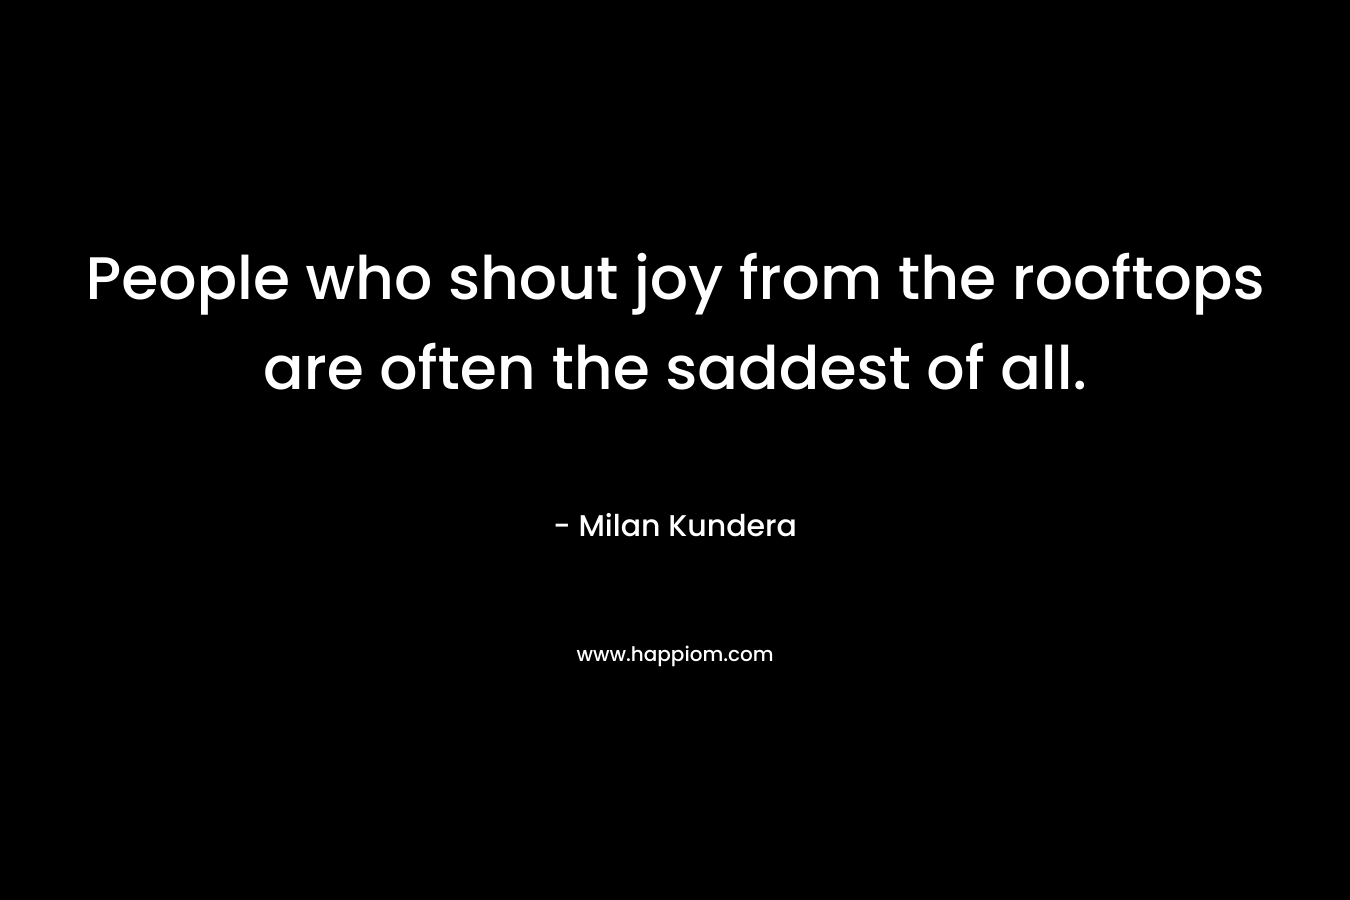 People who shout joy from the rooftops are often the saddest of all. – Milan Kundera